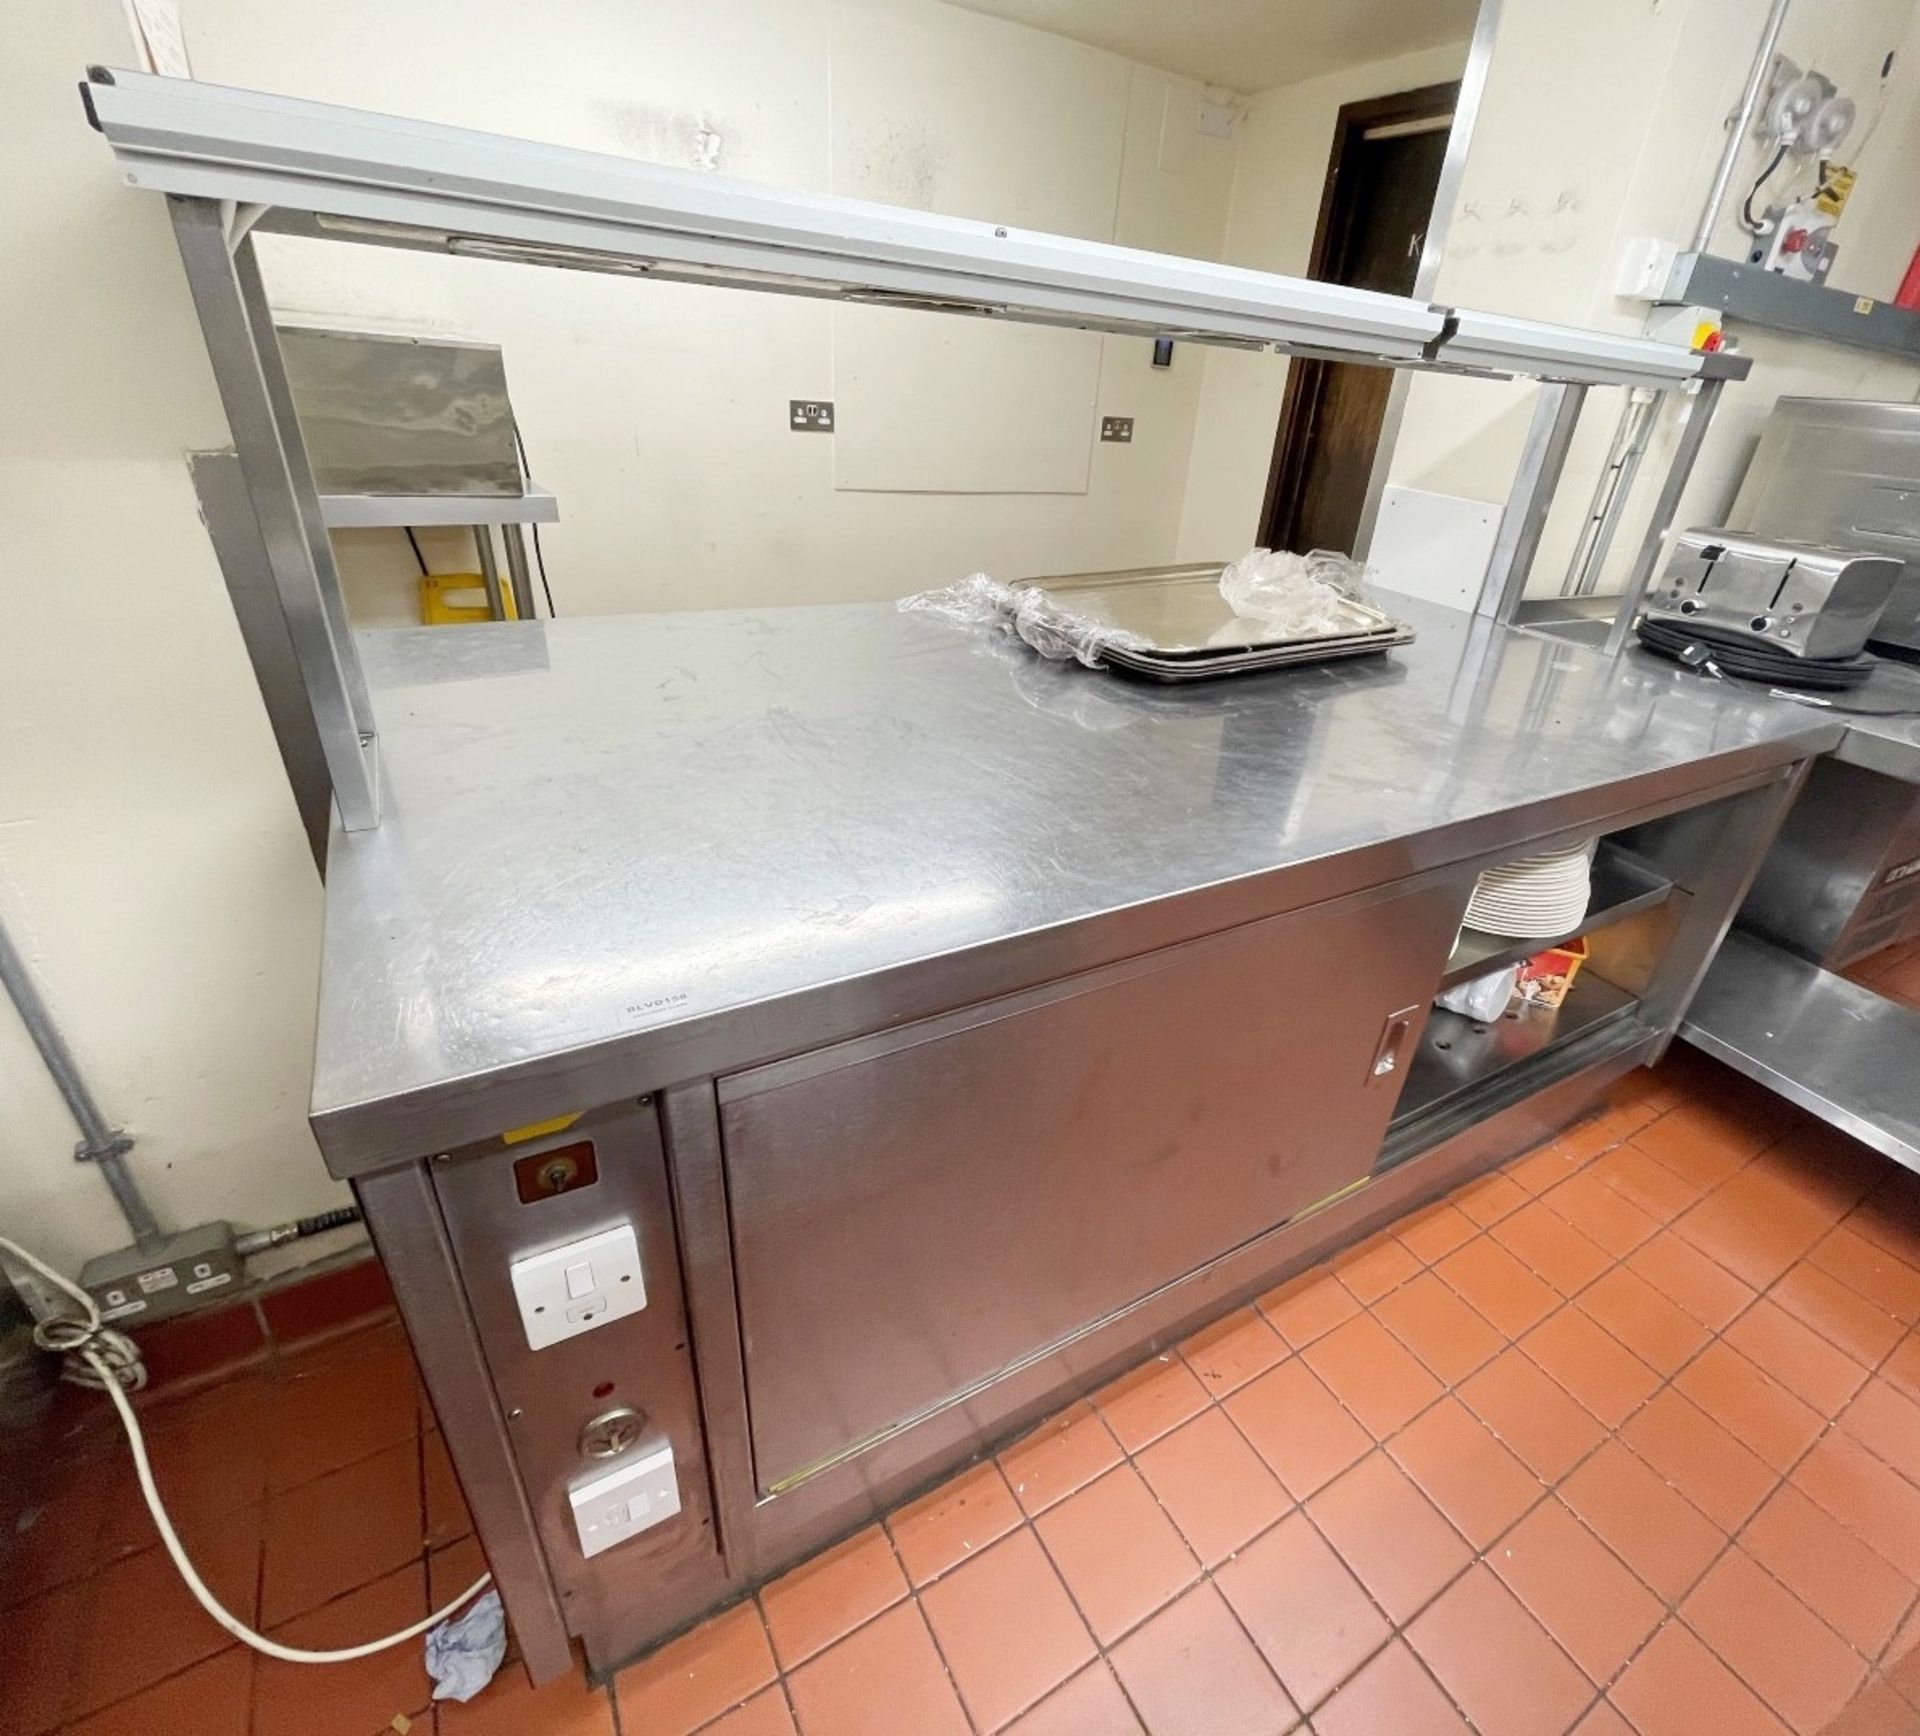 1 x Commercial Kitchen Plate Warming Cabinet With Large Preparation Area and Overhead Food Warming